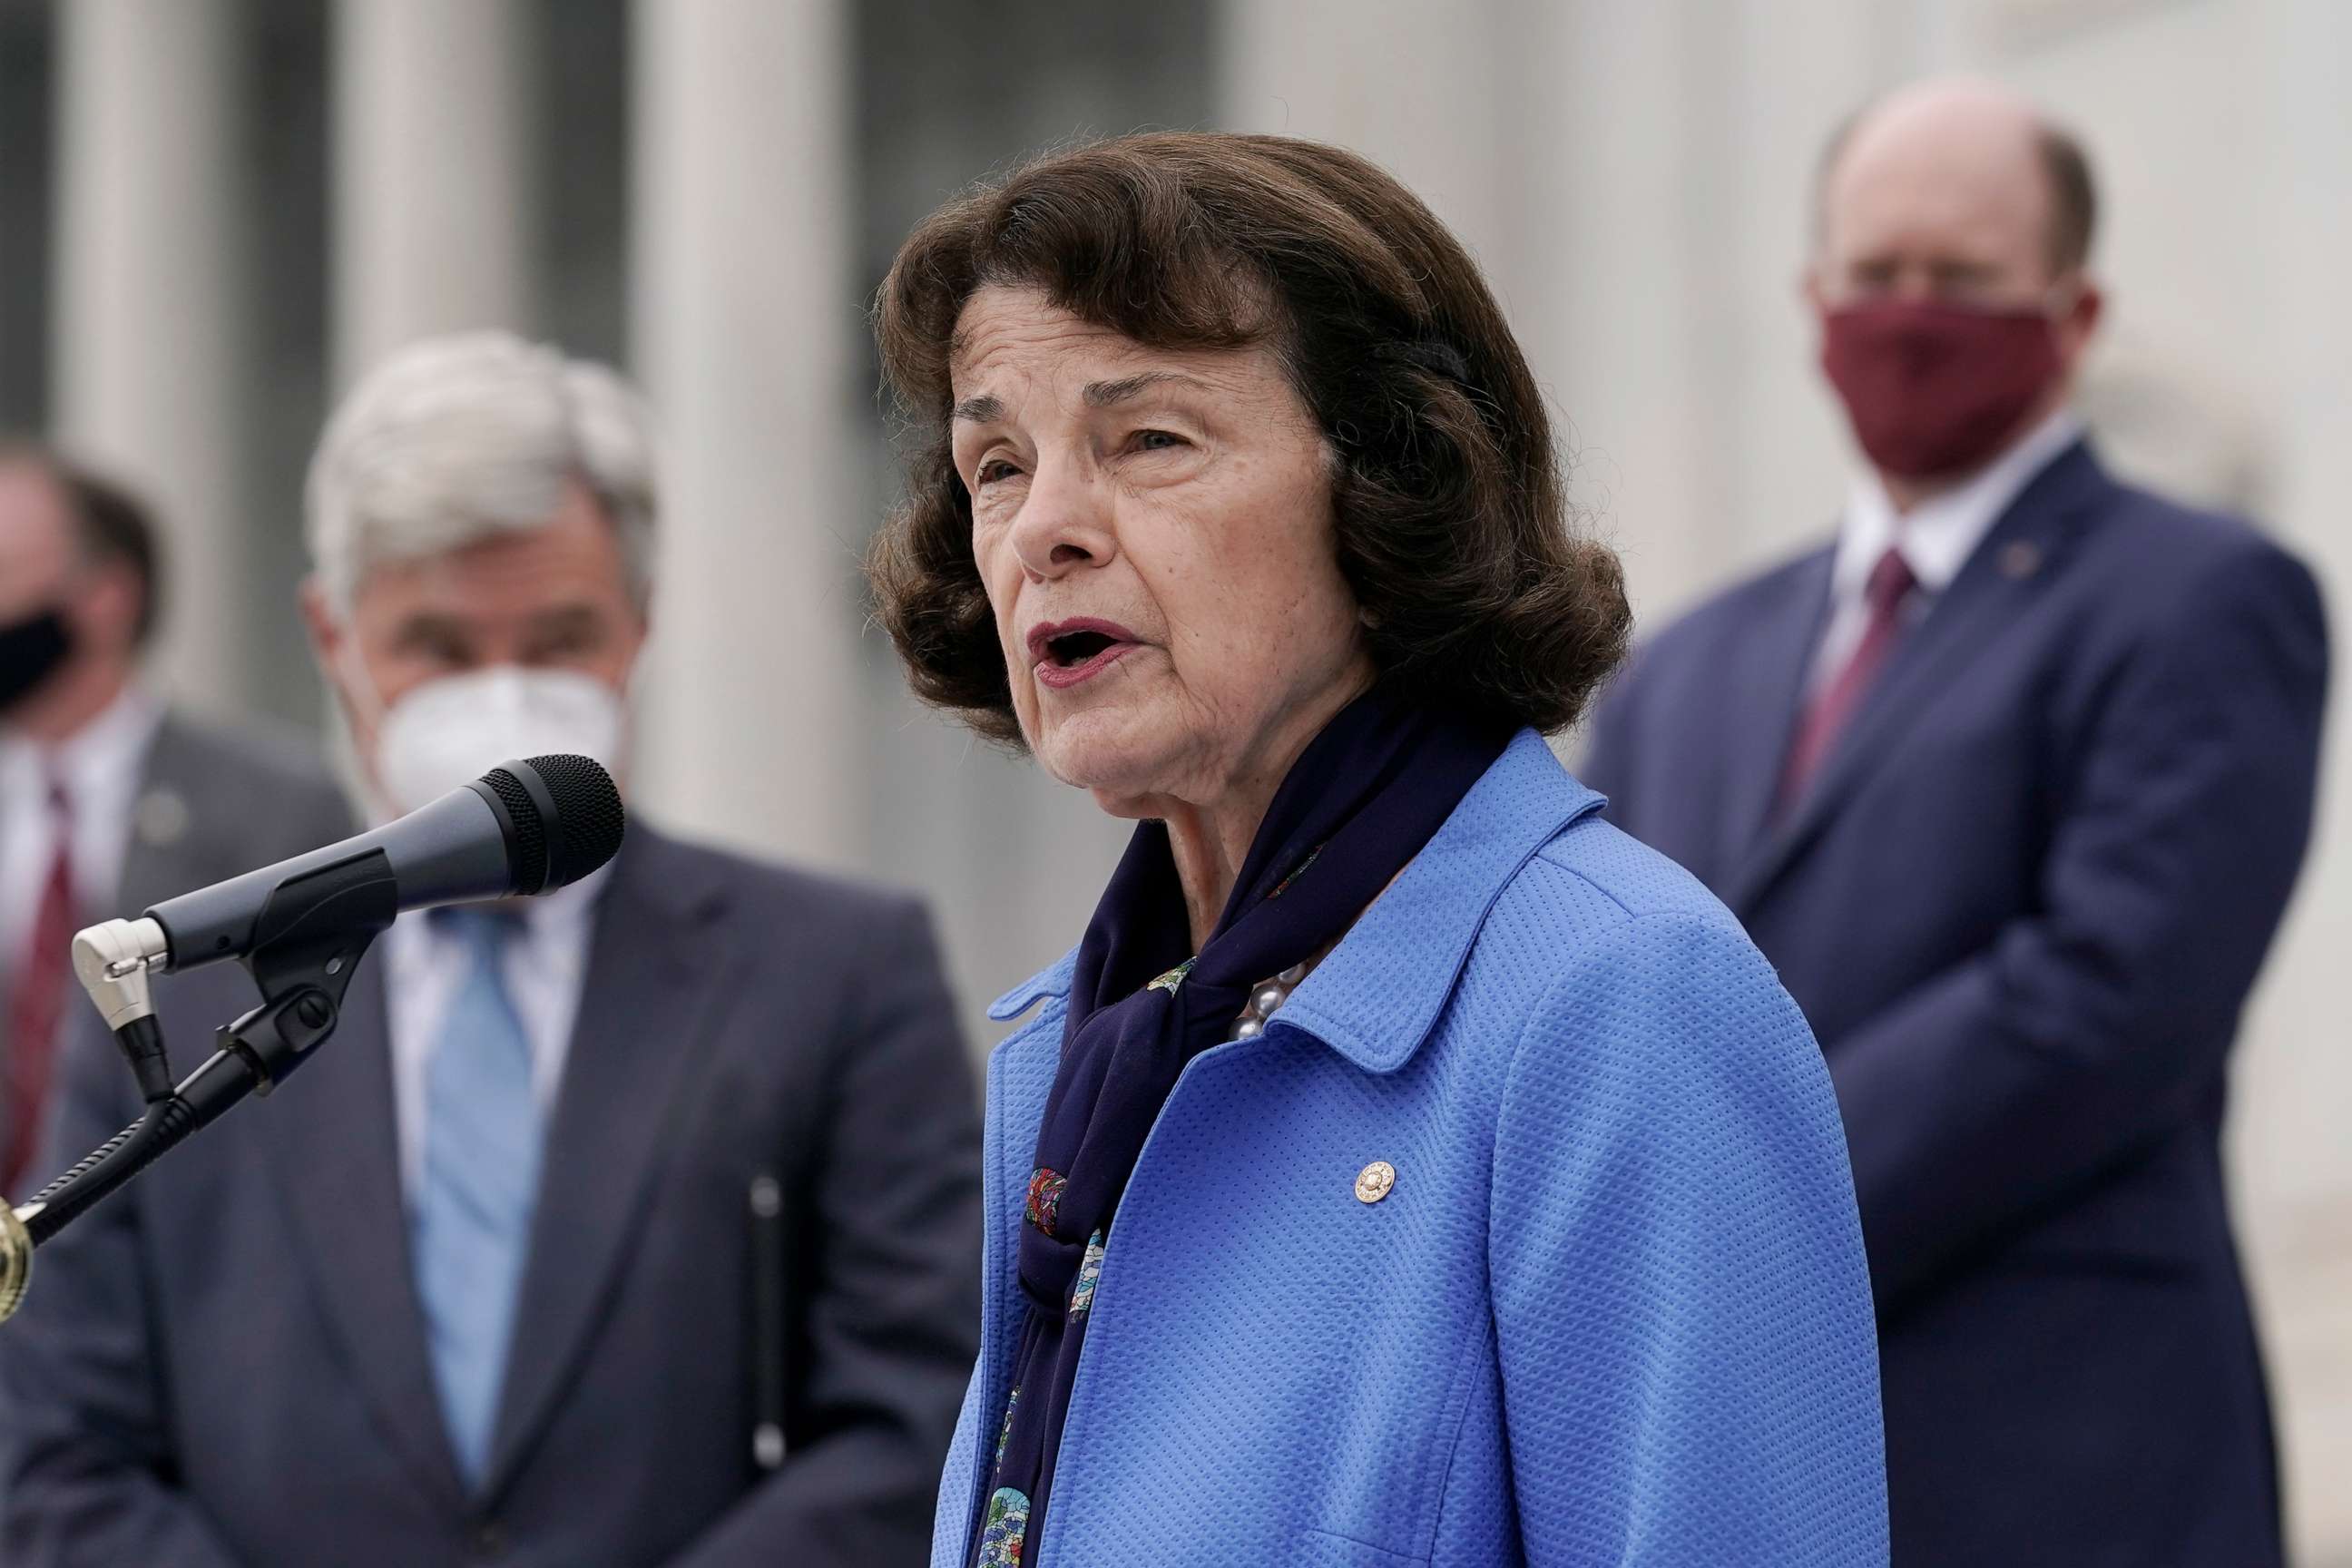 PHOTO: Senate Judiciary Committee ranking member Sen. Dianne Feinstein, D-Calif., speaks during a news conference on Oct. 22, 2020, at the Capitol in Washington.